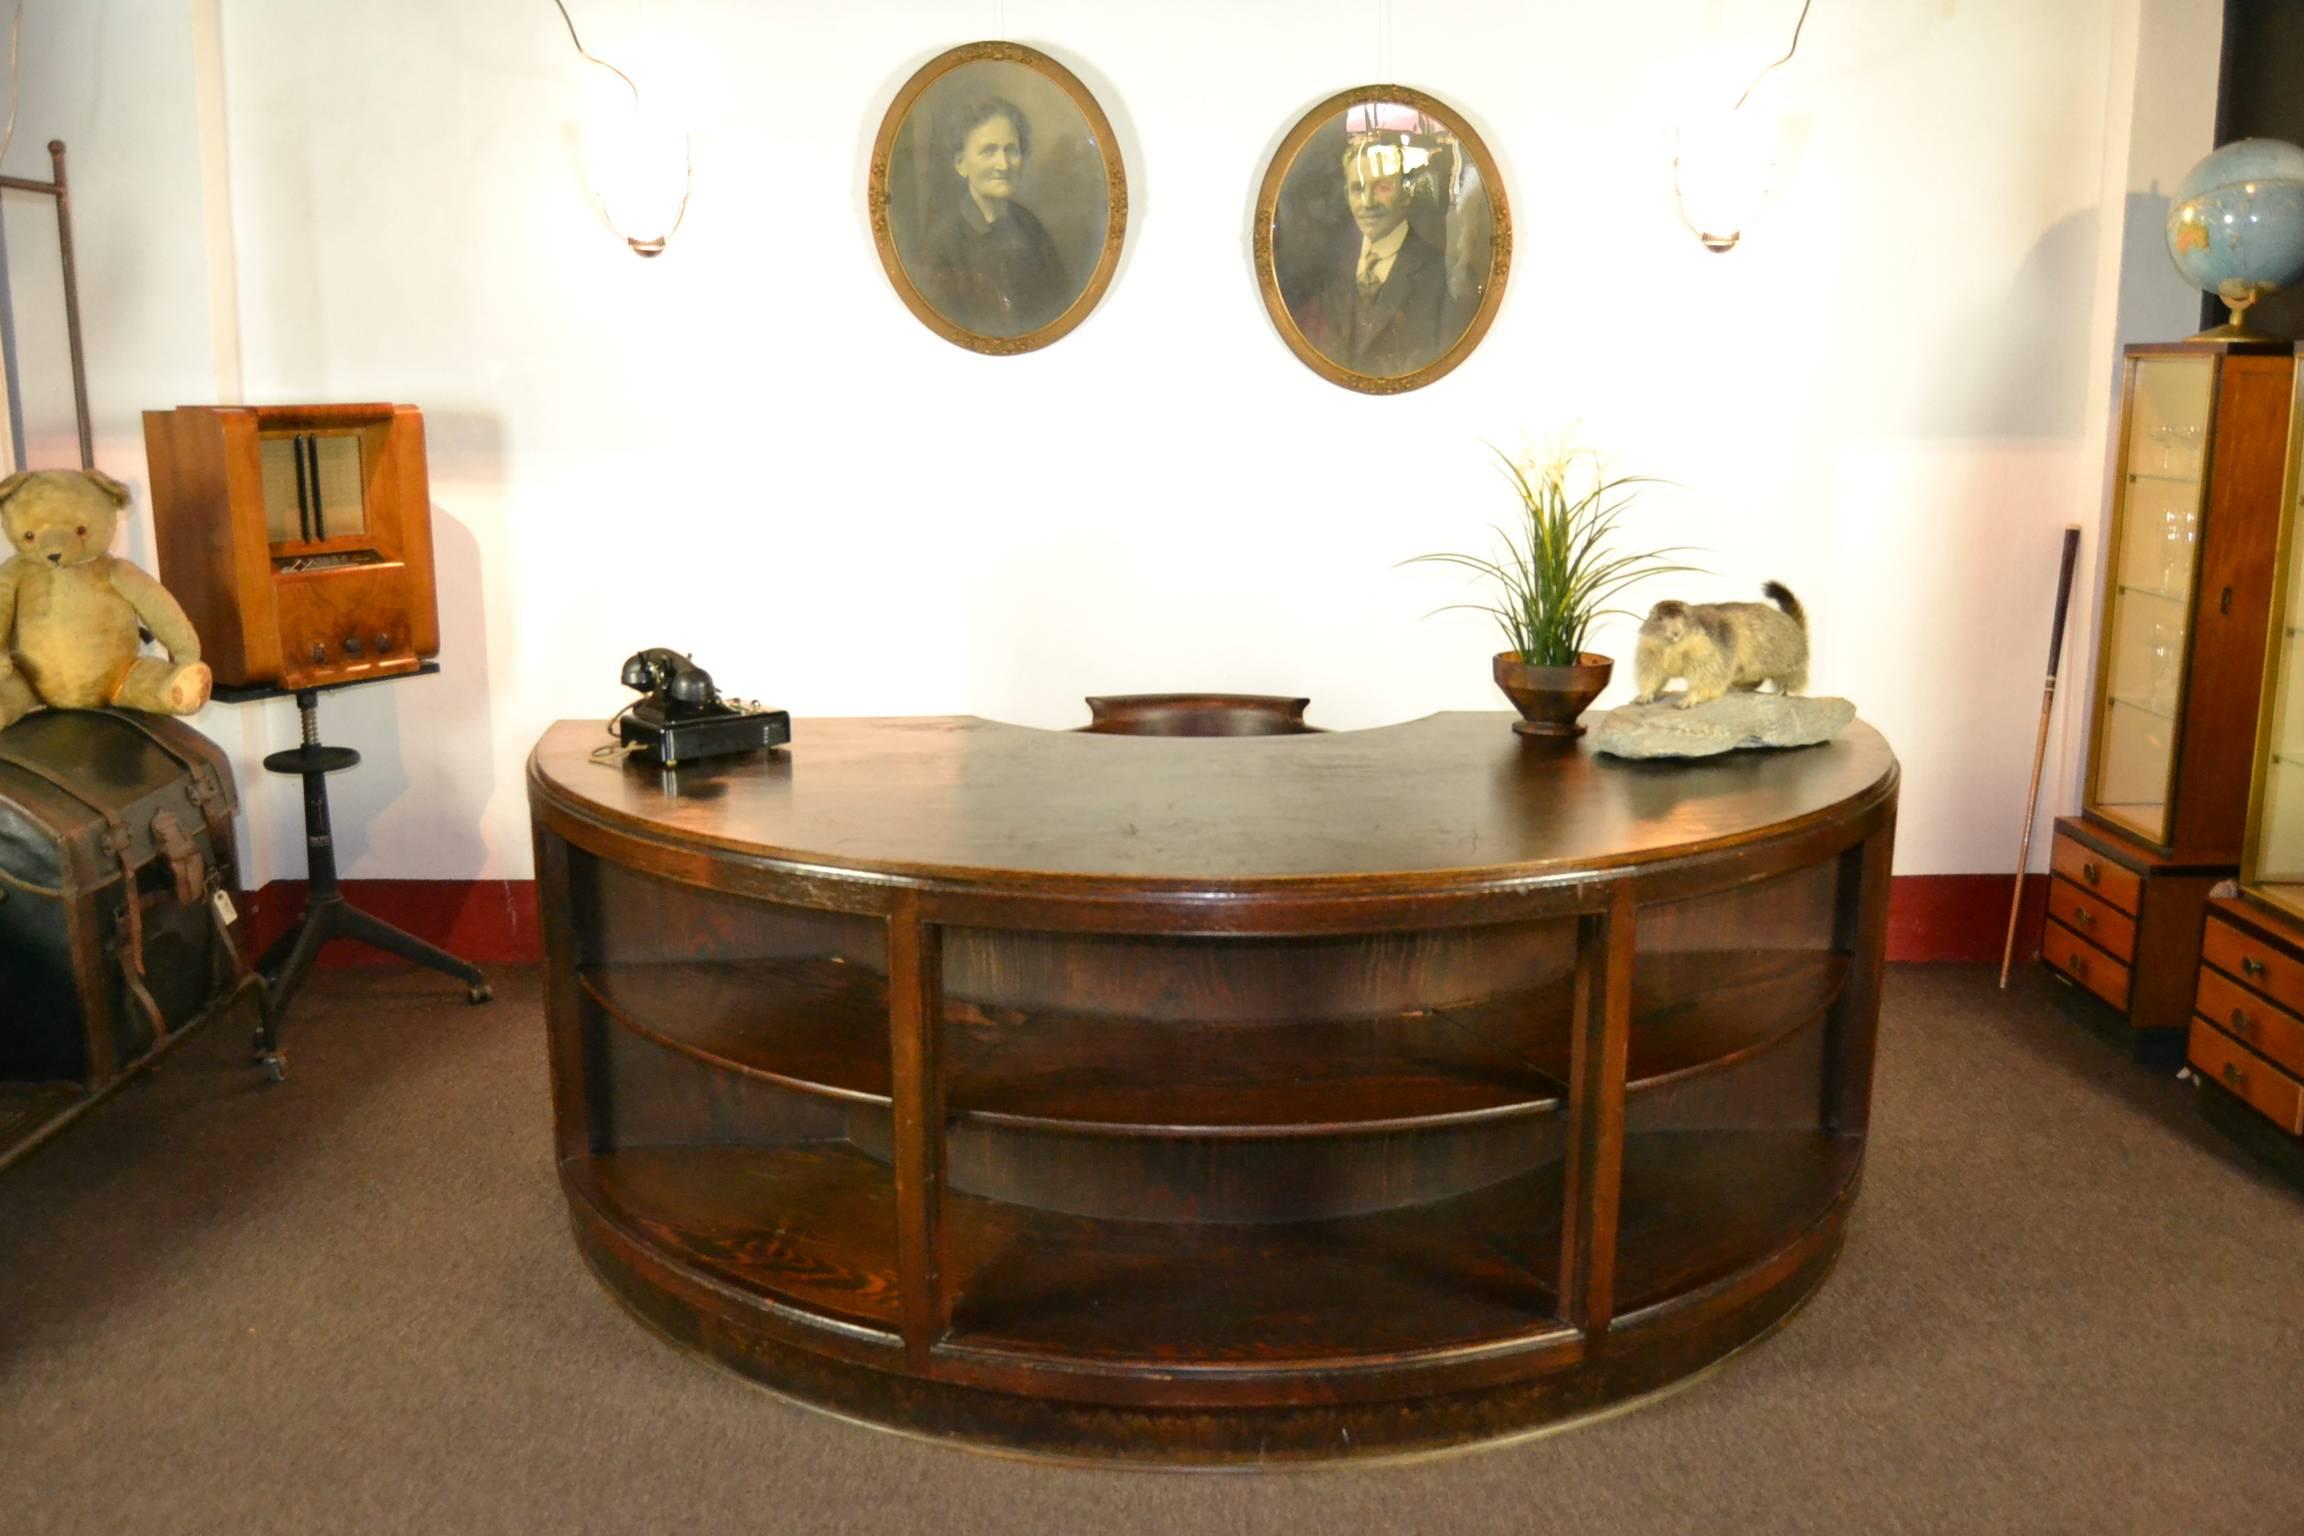 Impressive half round wooden executive desk.
Antique handmade Art Deco desk from the 1940s.
Used condition, what gives a beautiful old patina.
In front with open shelves so you can expose items, books at the back also storage place left and